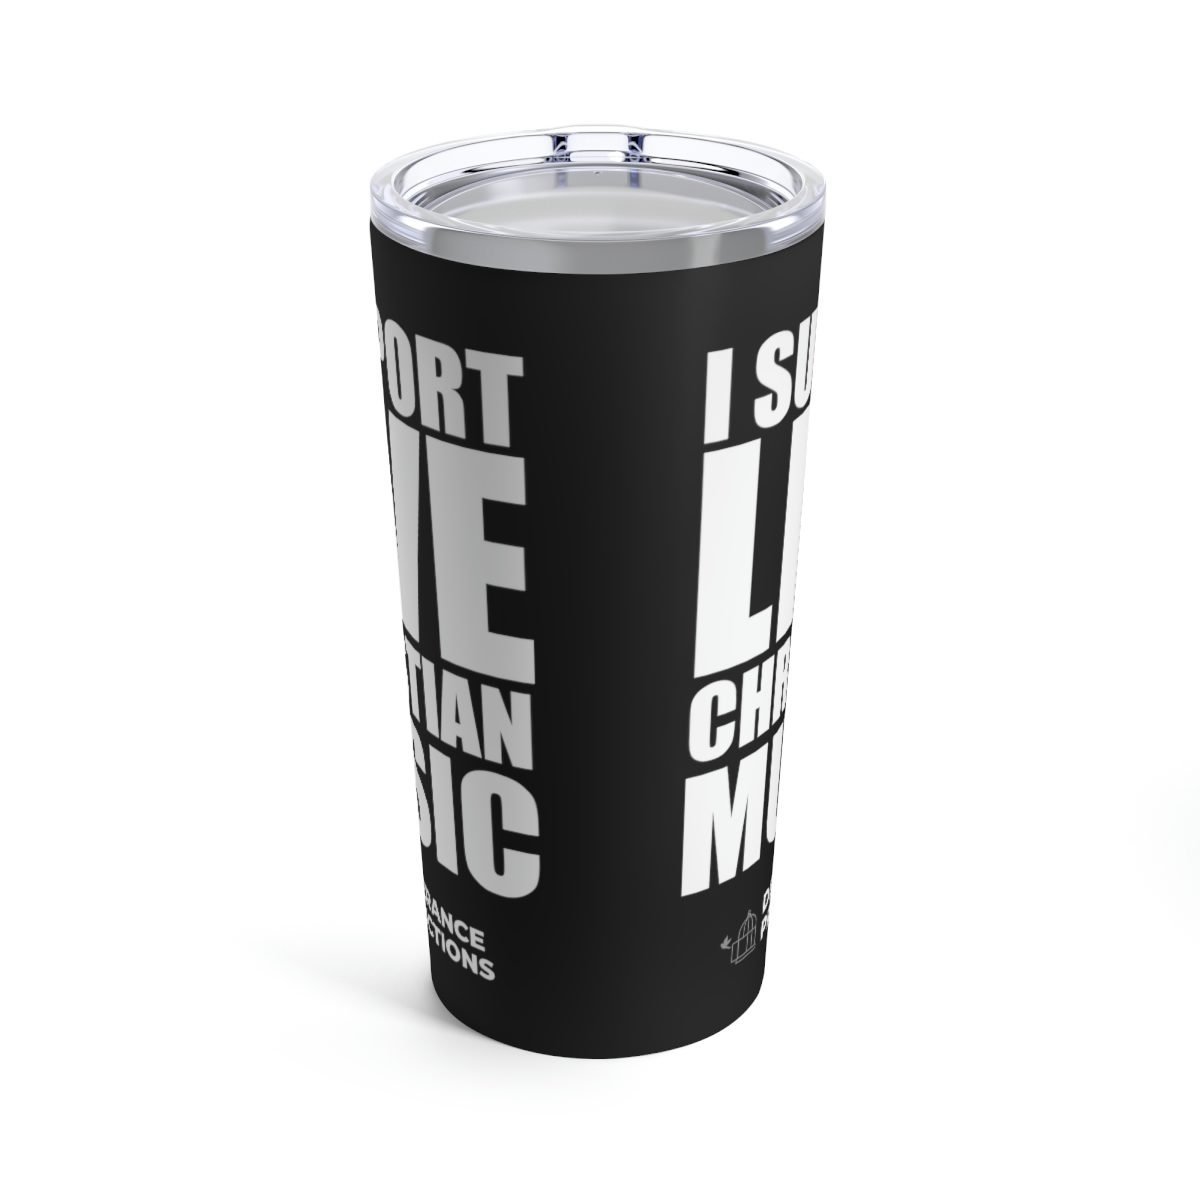 Deliverance Productions – I Support Live Christian Music 20 oz Stainless Steel Tumbler